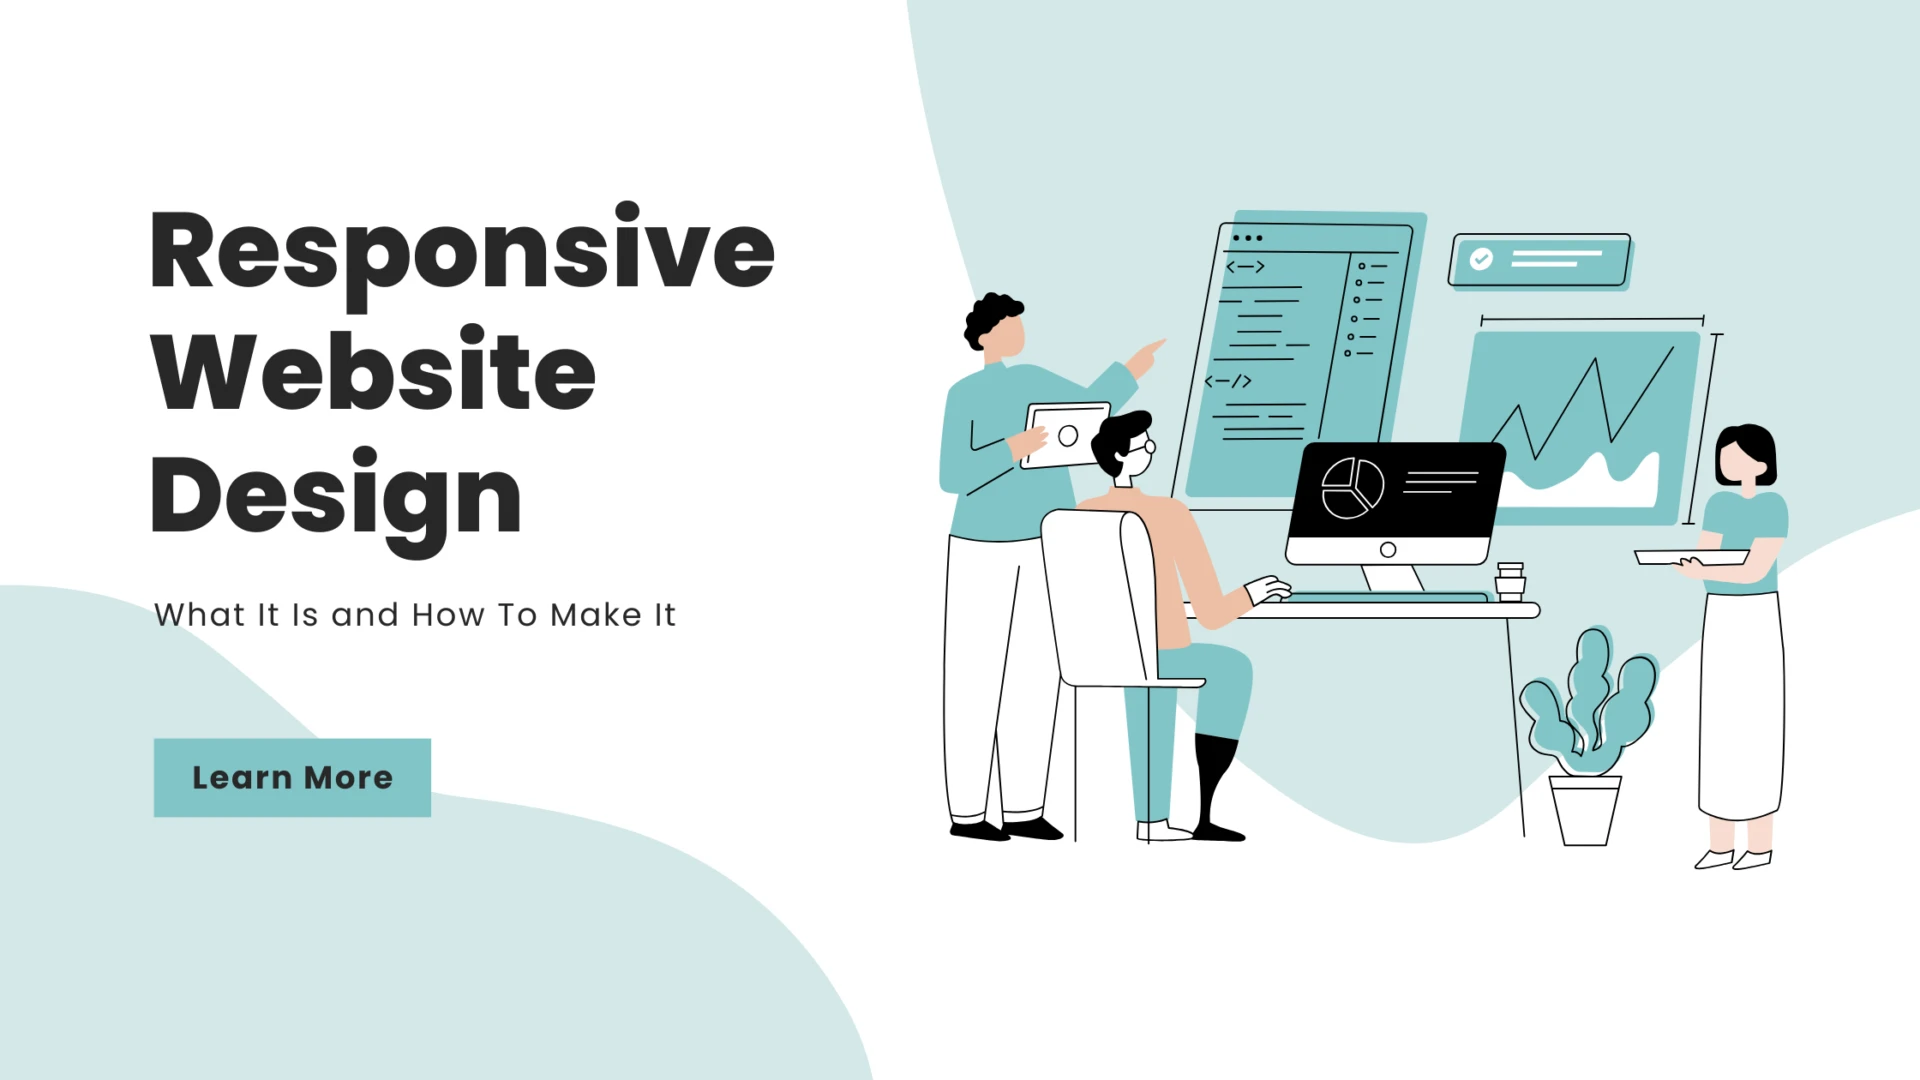 Responsive Website Design – What It Is and How To Make It